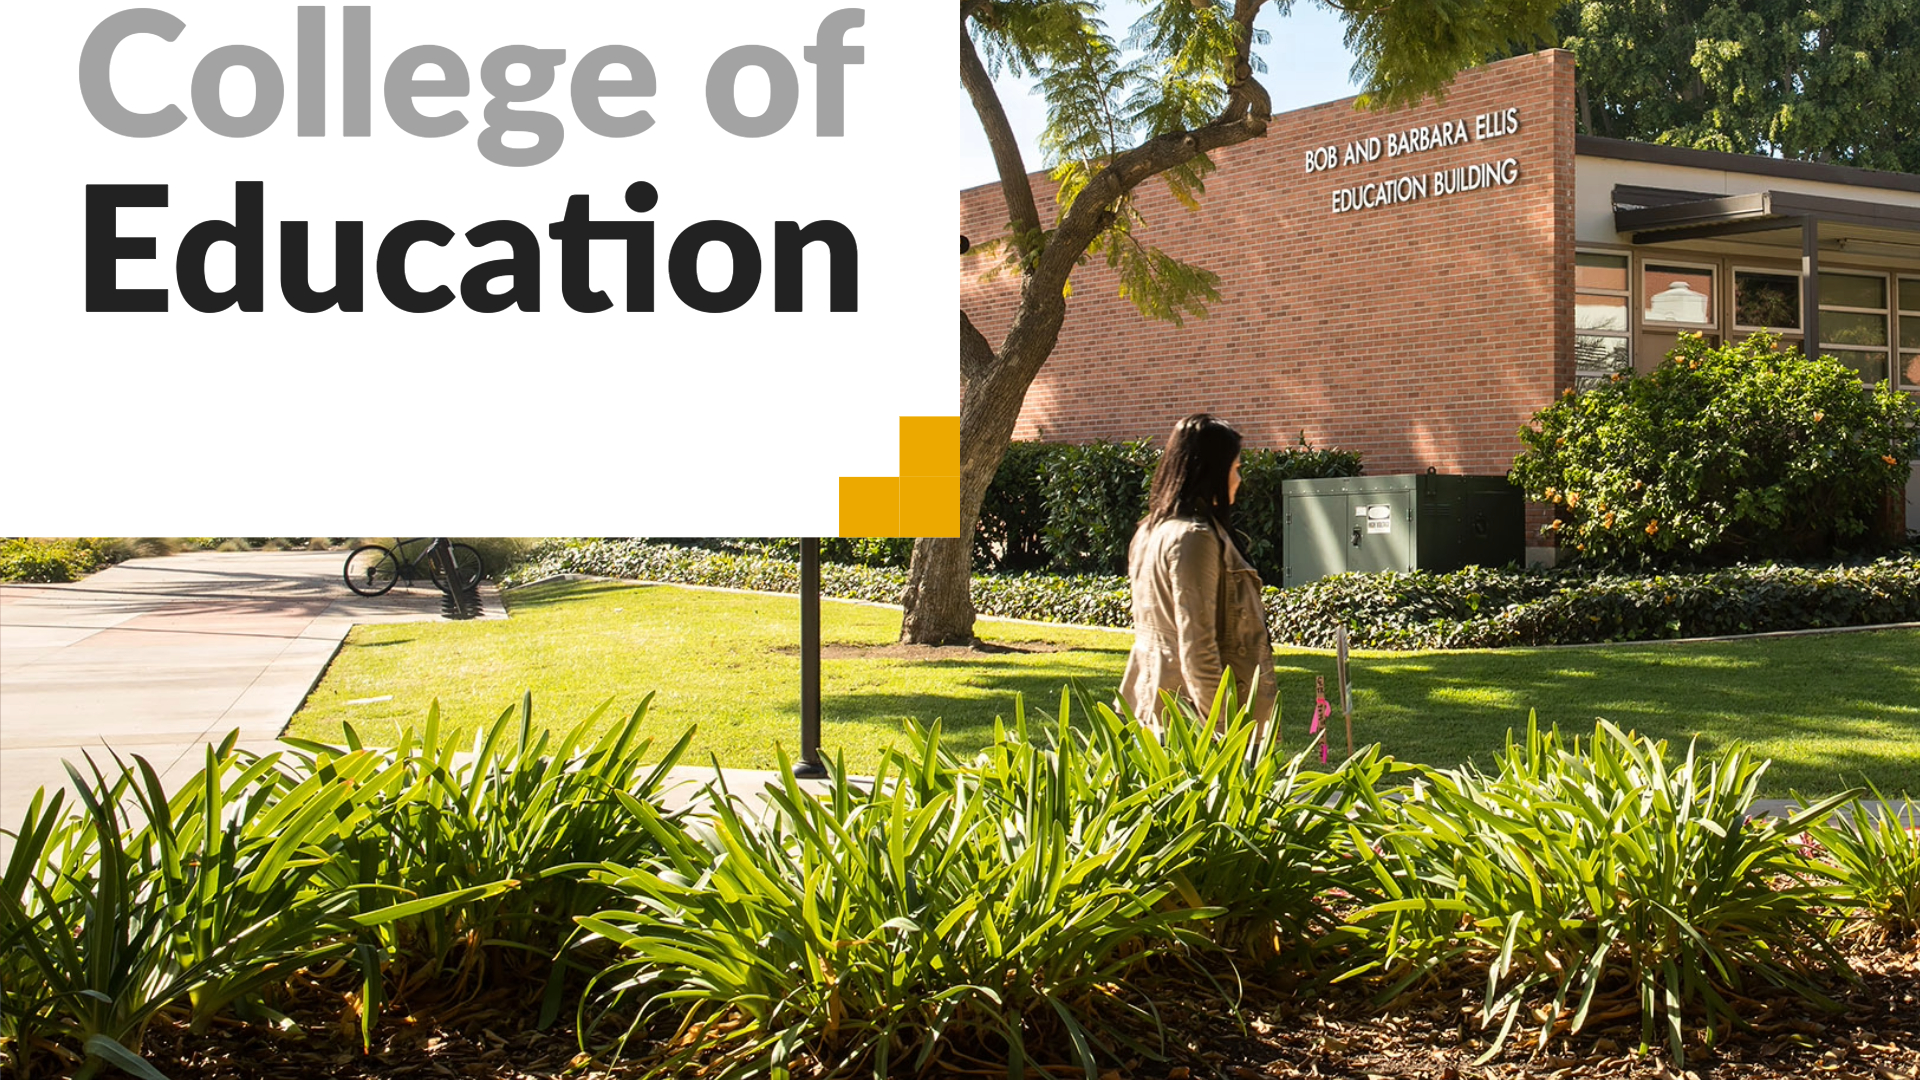 College of Education. Image shows a woman walking past the education building. 